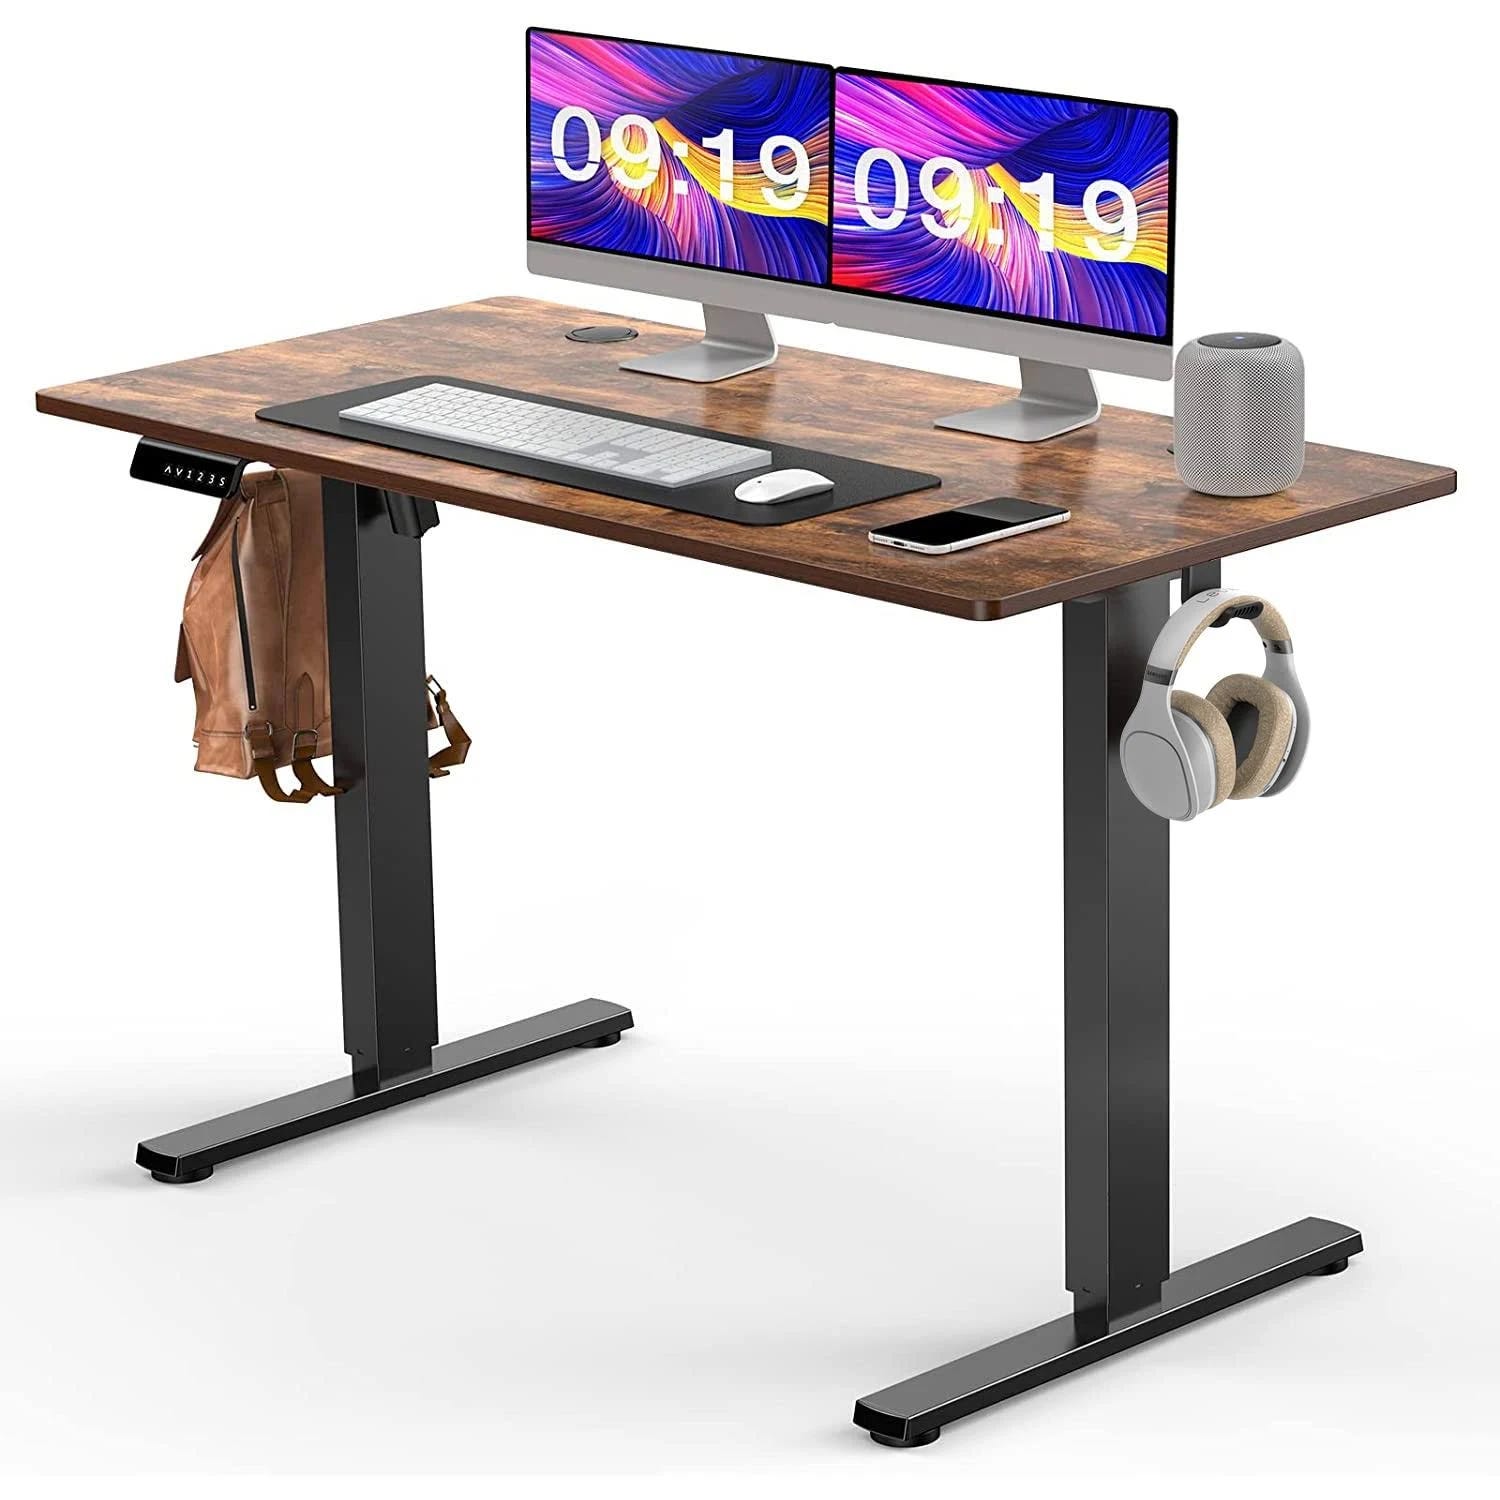 Standing Desk Convertible 48 Inch Computer Table | Image